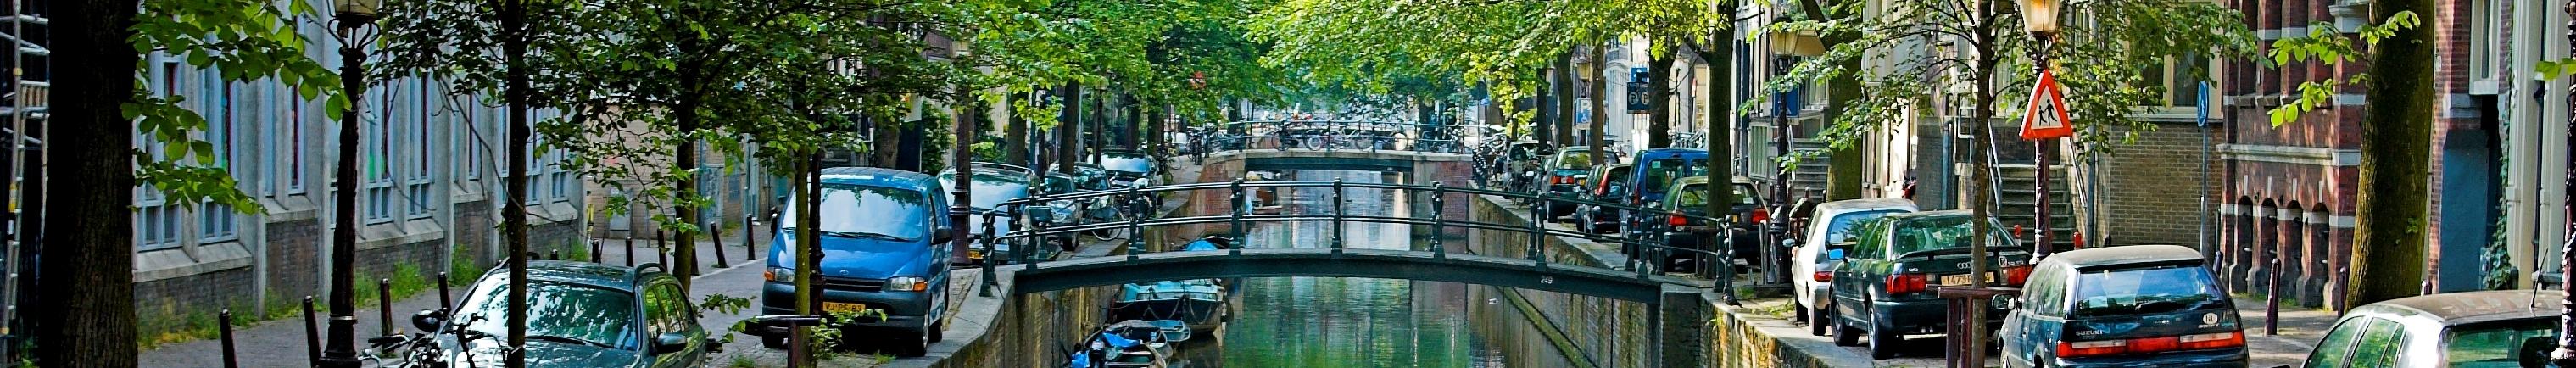 Banner image for Amsterdam on GigsGuide